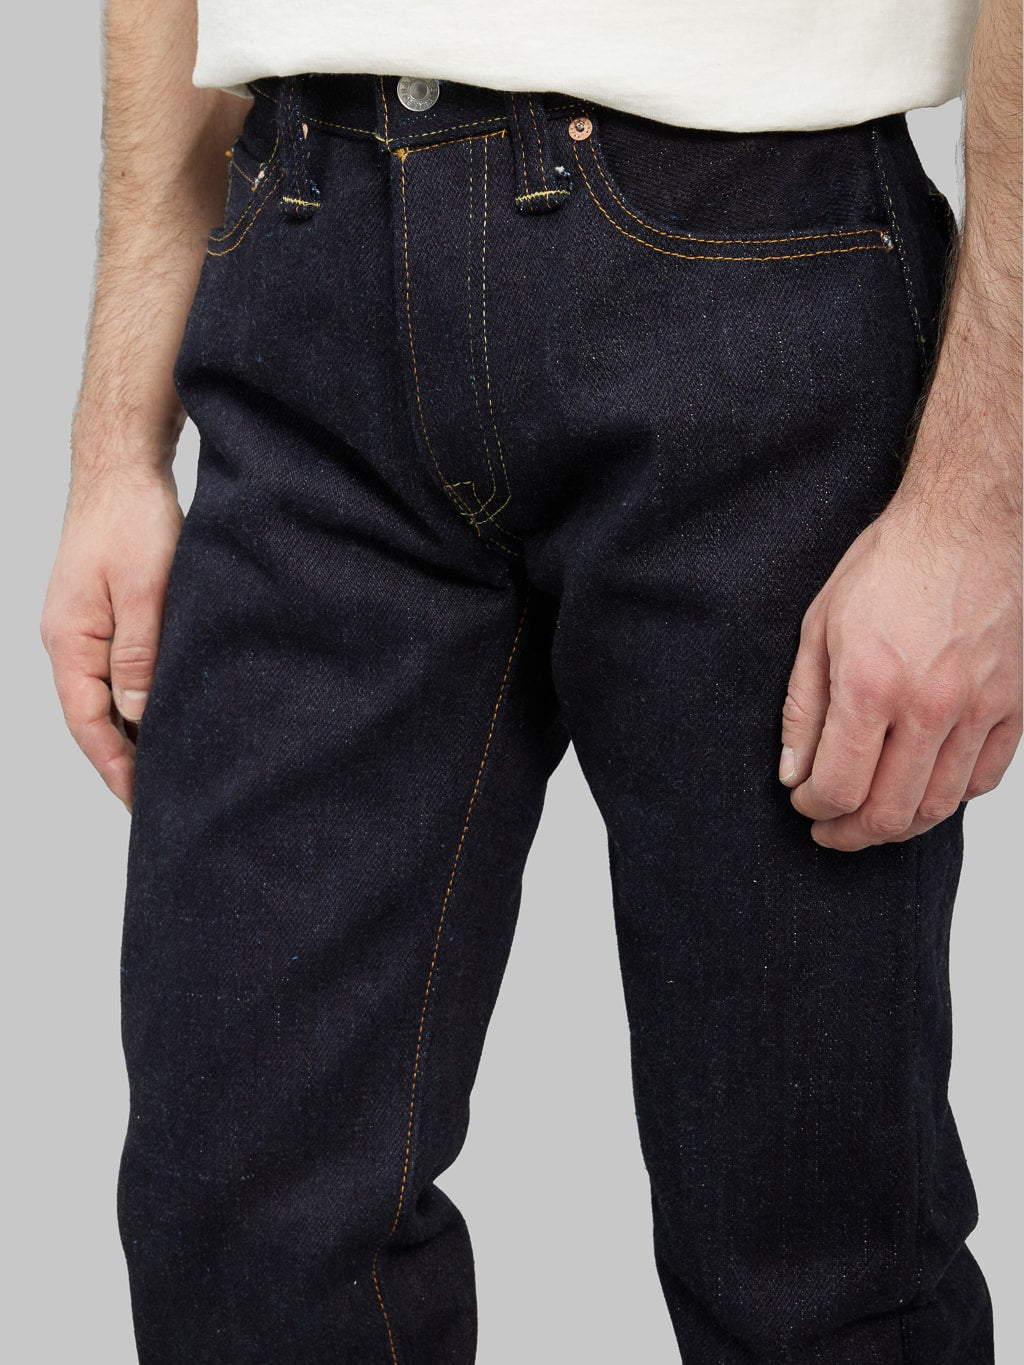 The Strike Gold Extra Heavyweight straight tapered jeans front rise